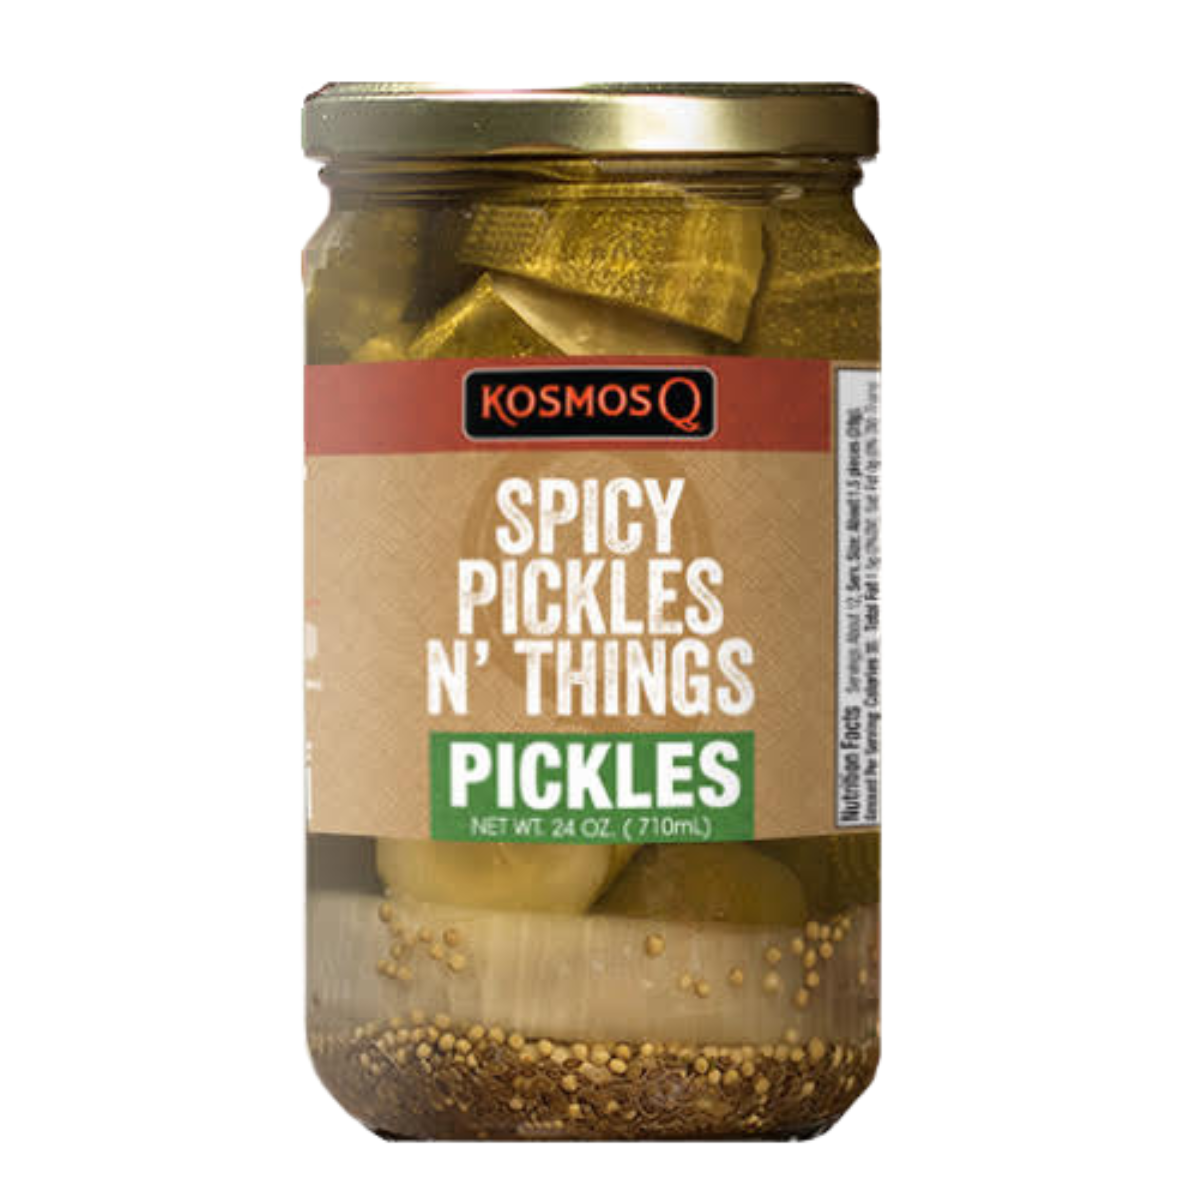 https://cdn.shopify.com/s/files/1/0504/1926/9791/products/kosmos-q-bbq-products-supplies-spicy-pickles-n-things-34963900203167_1600x.png?v=1681224766